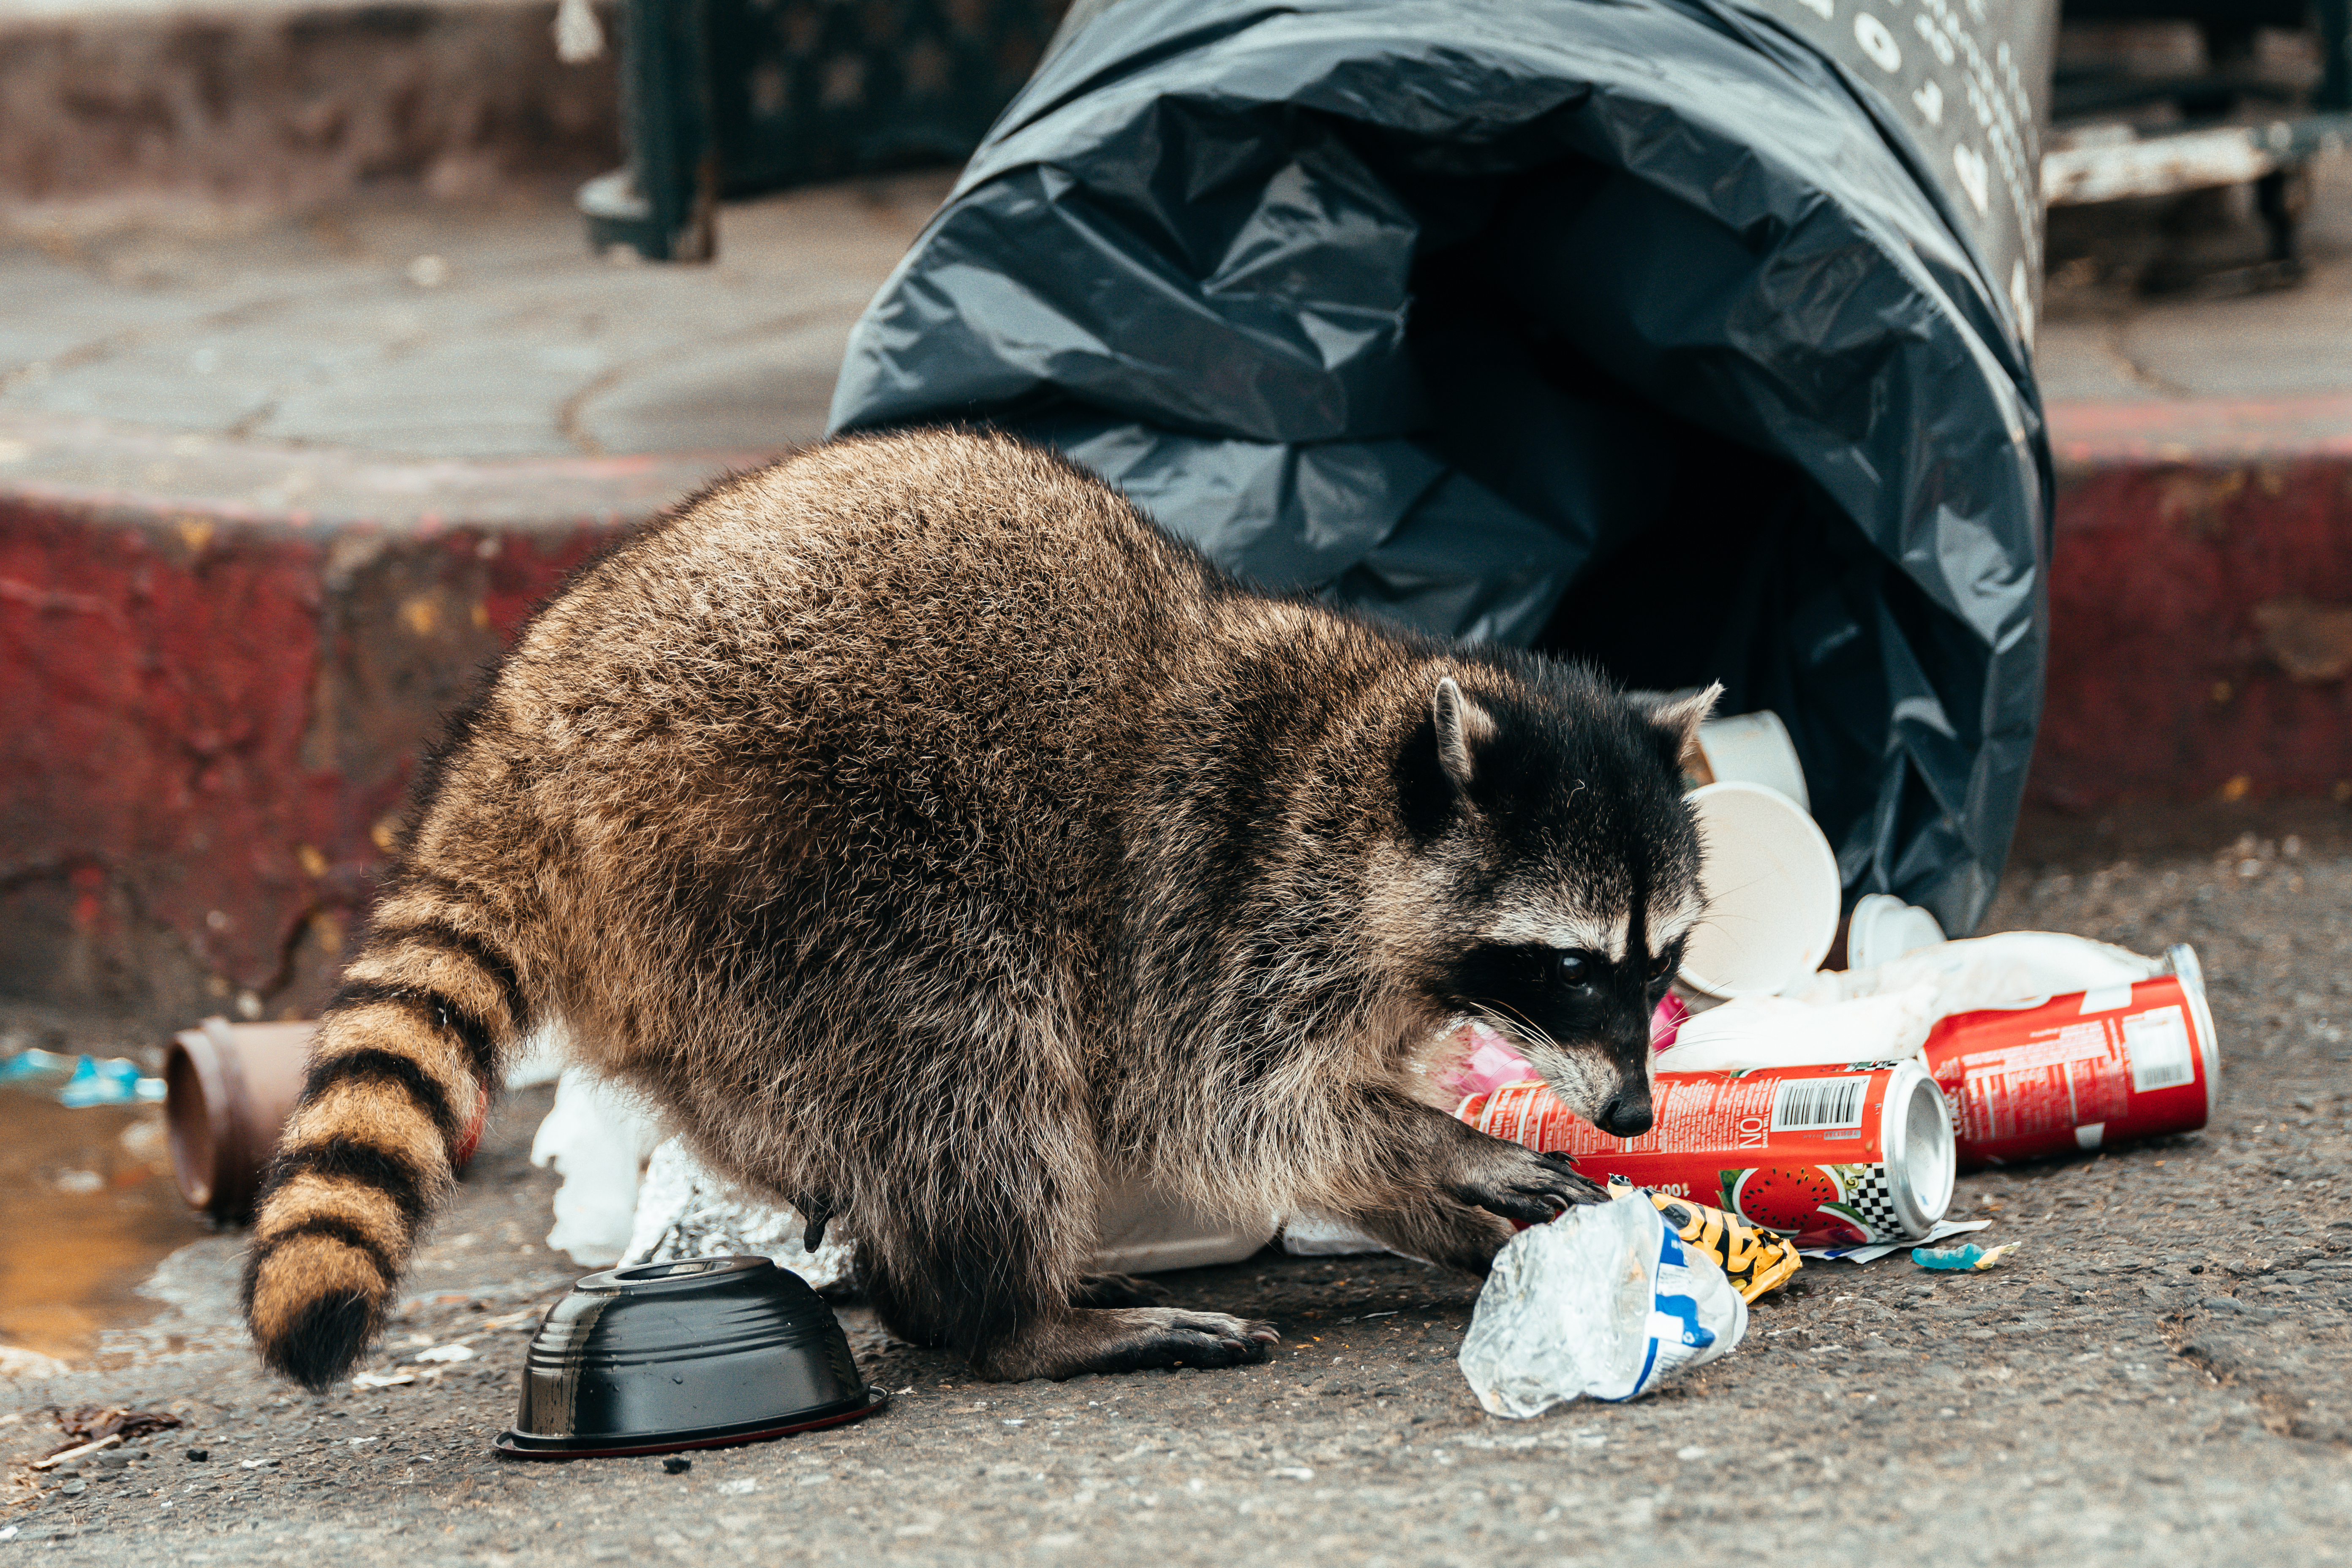 A raccoon rummaging in a trash can - if you are in need of residential wildlife control this fall, contact Thorn.